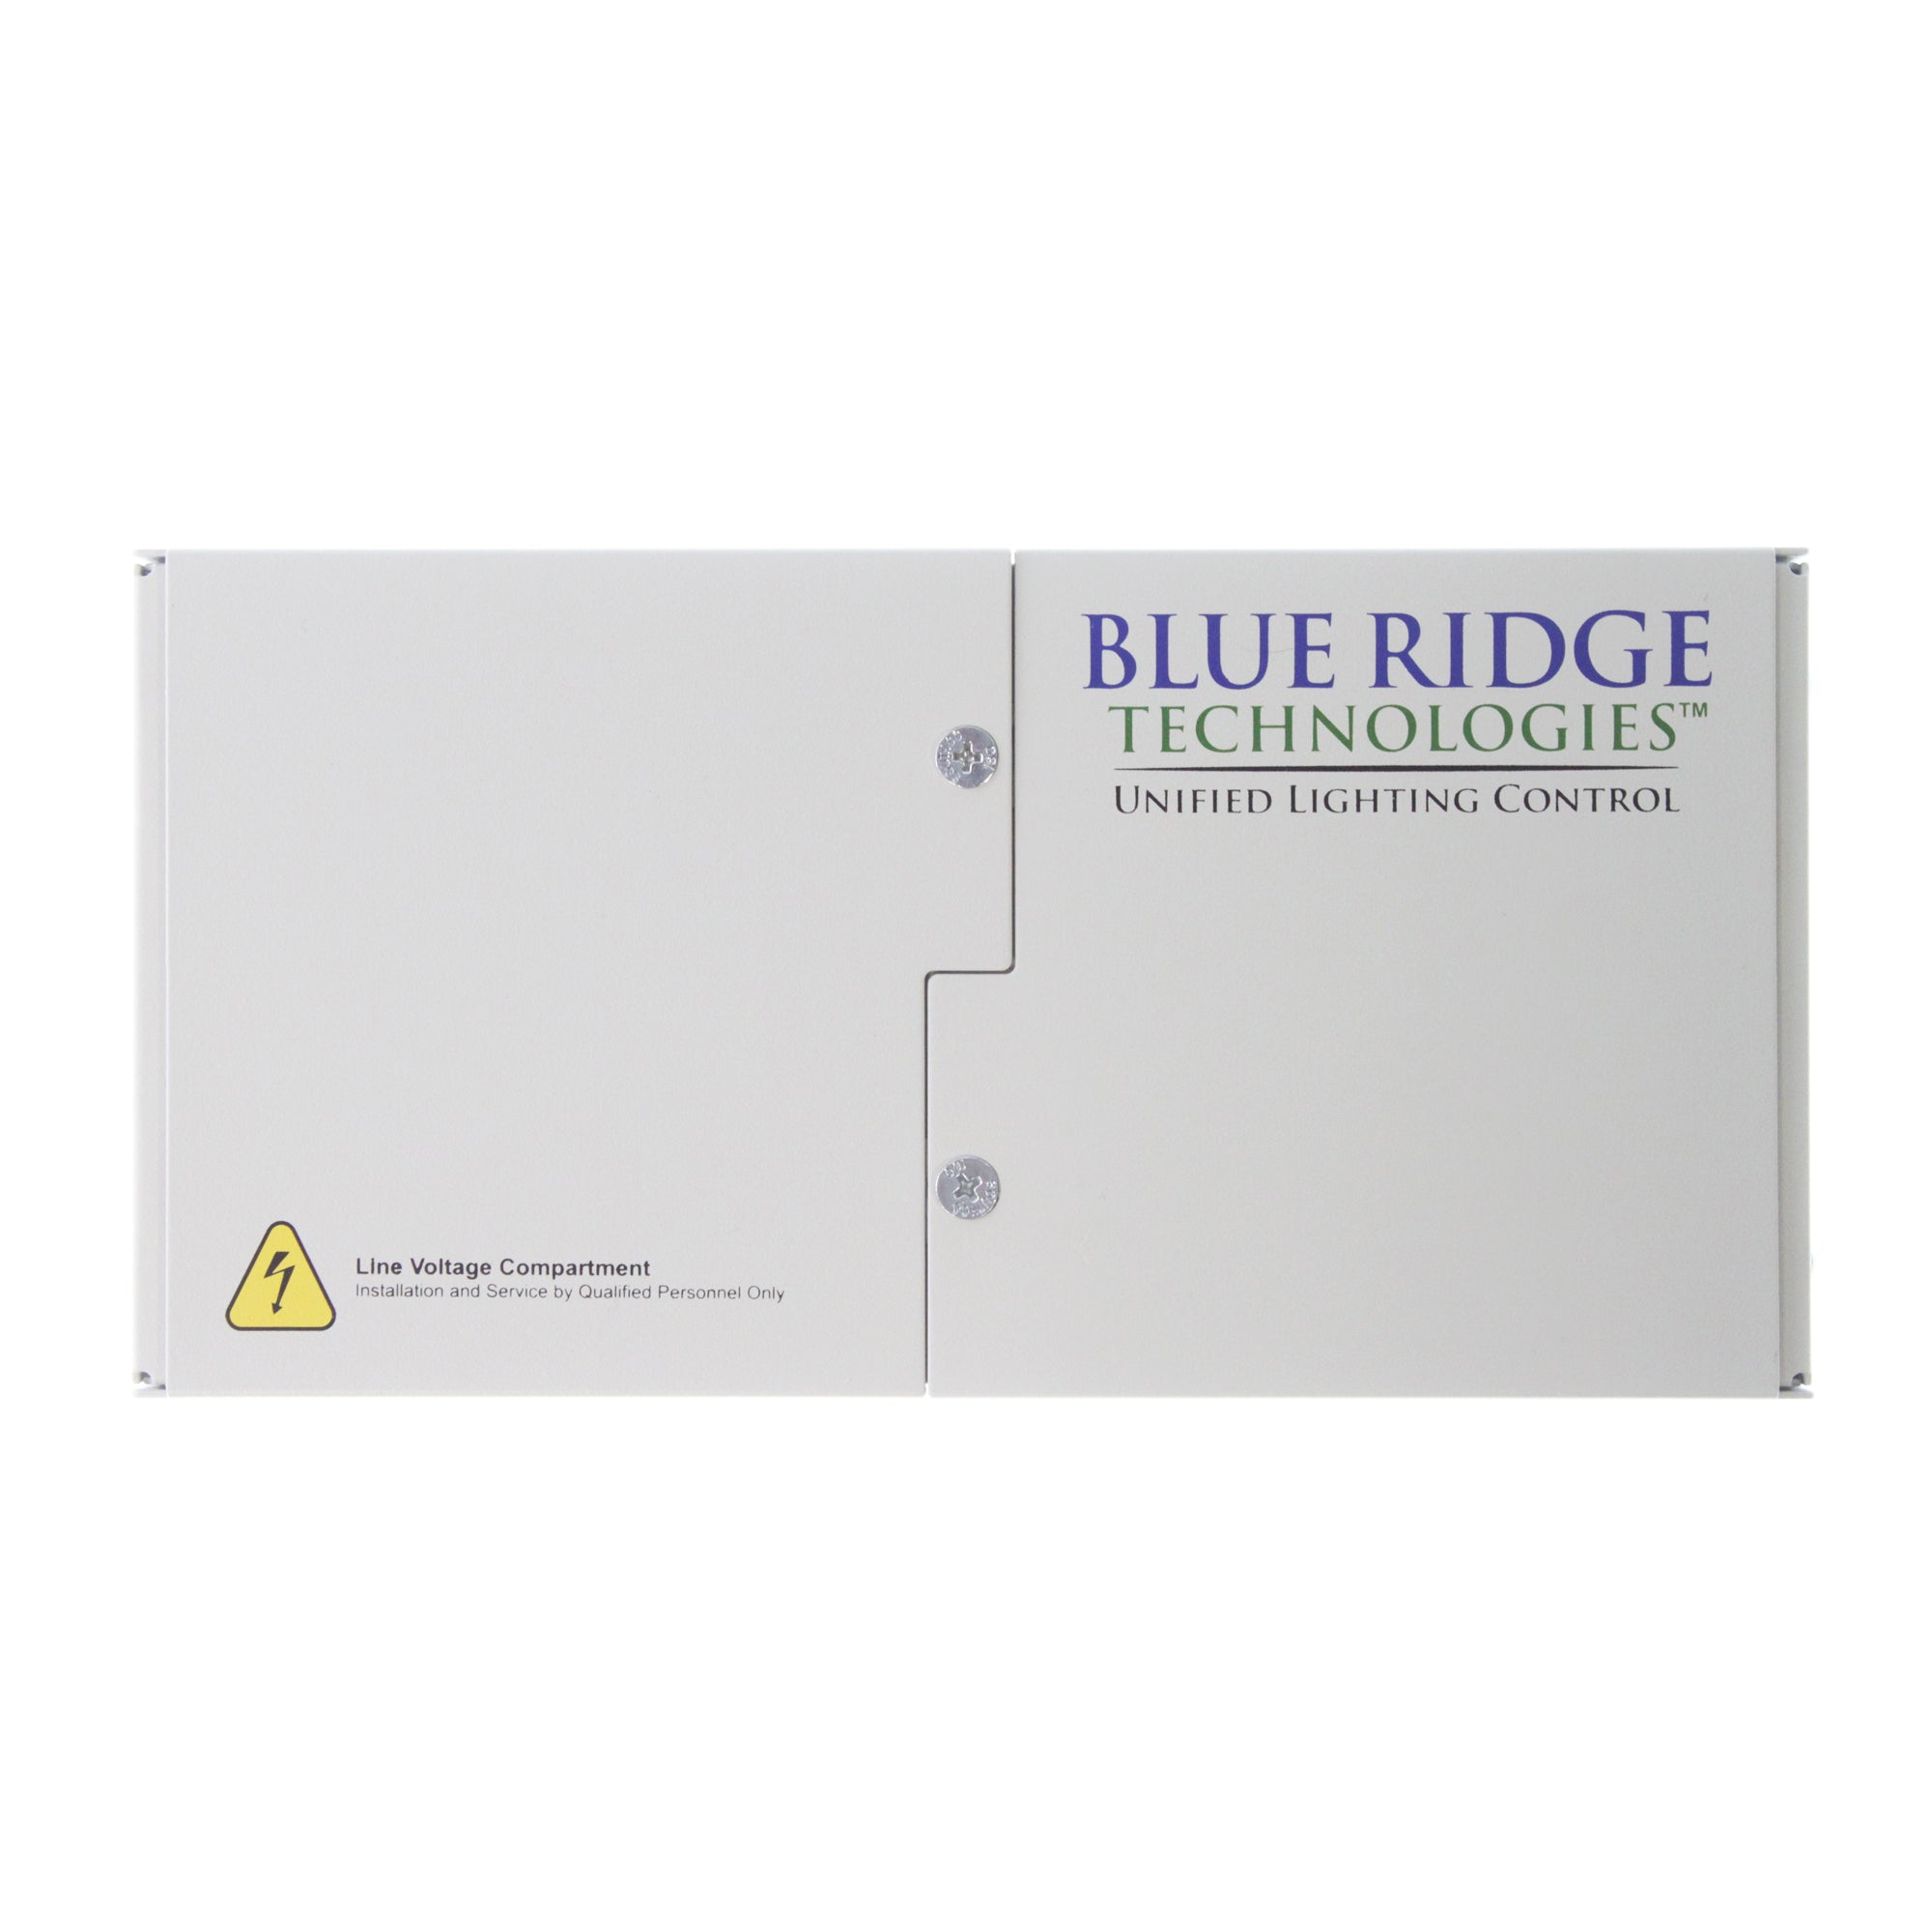 Blue Ridge Technologies, BLUE RIDGE TECHNOLOGIES SCDS-00 SATELLITE DIMMING CONTROL / POWER SUPPLY